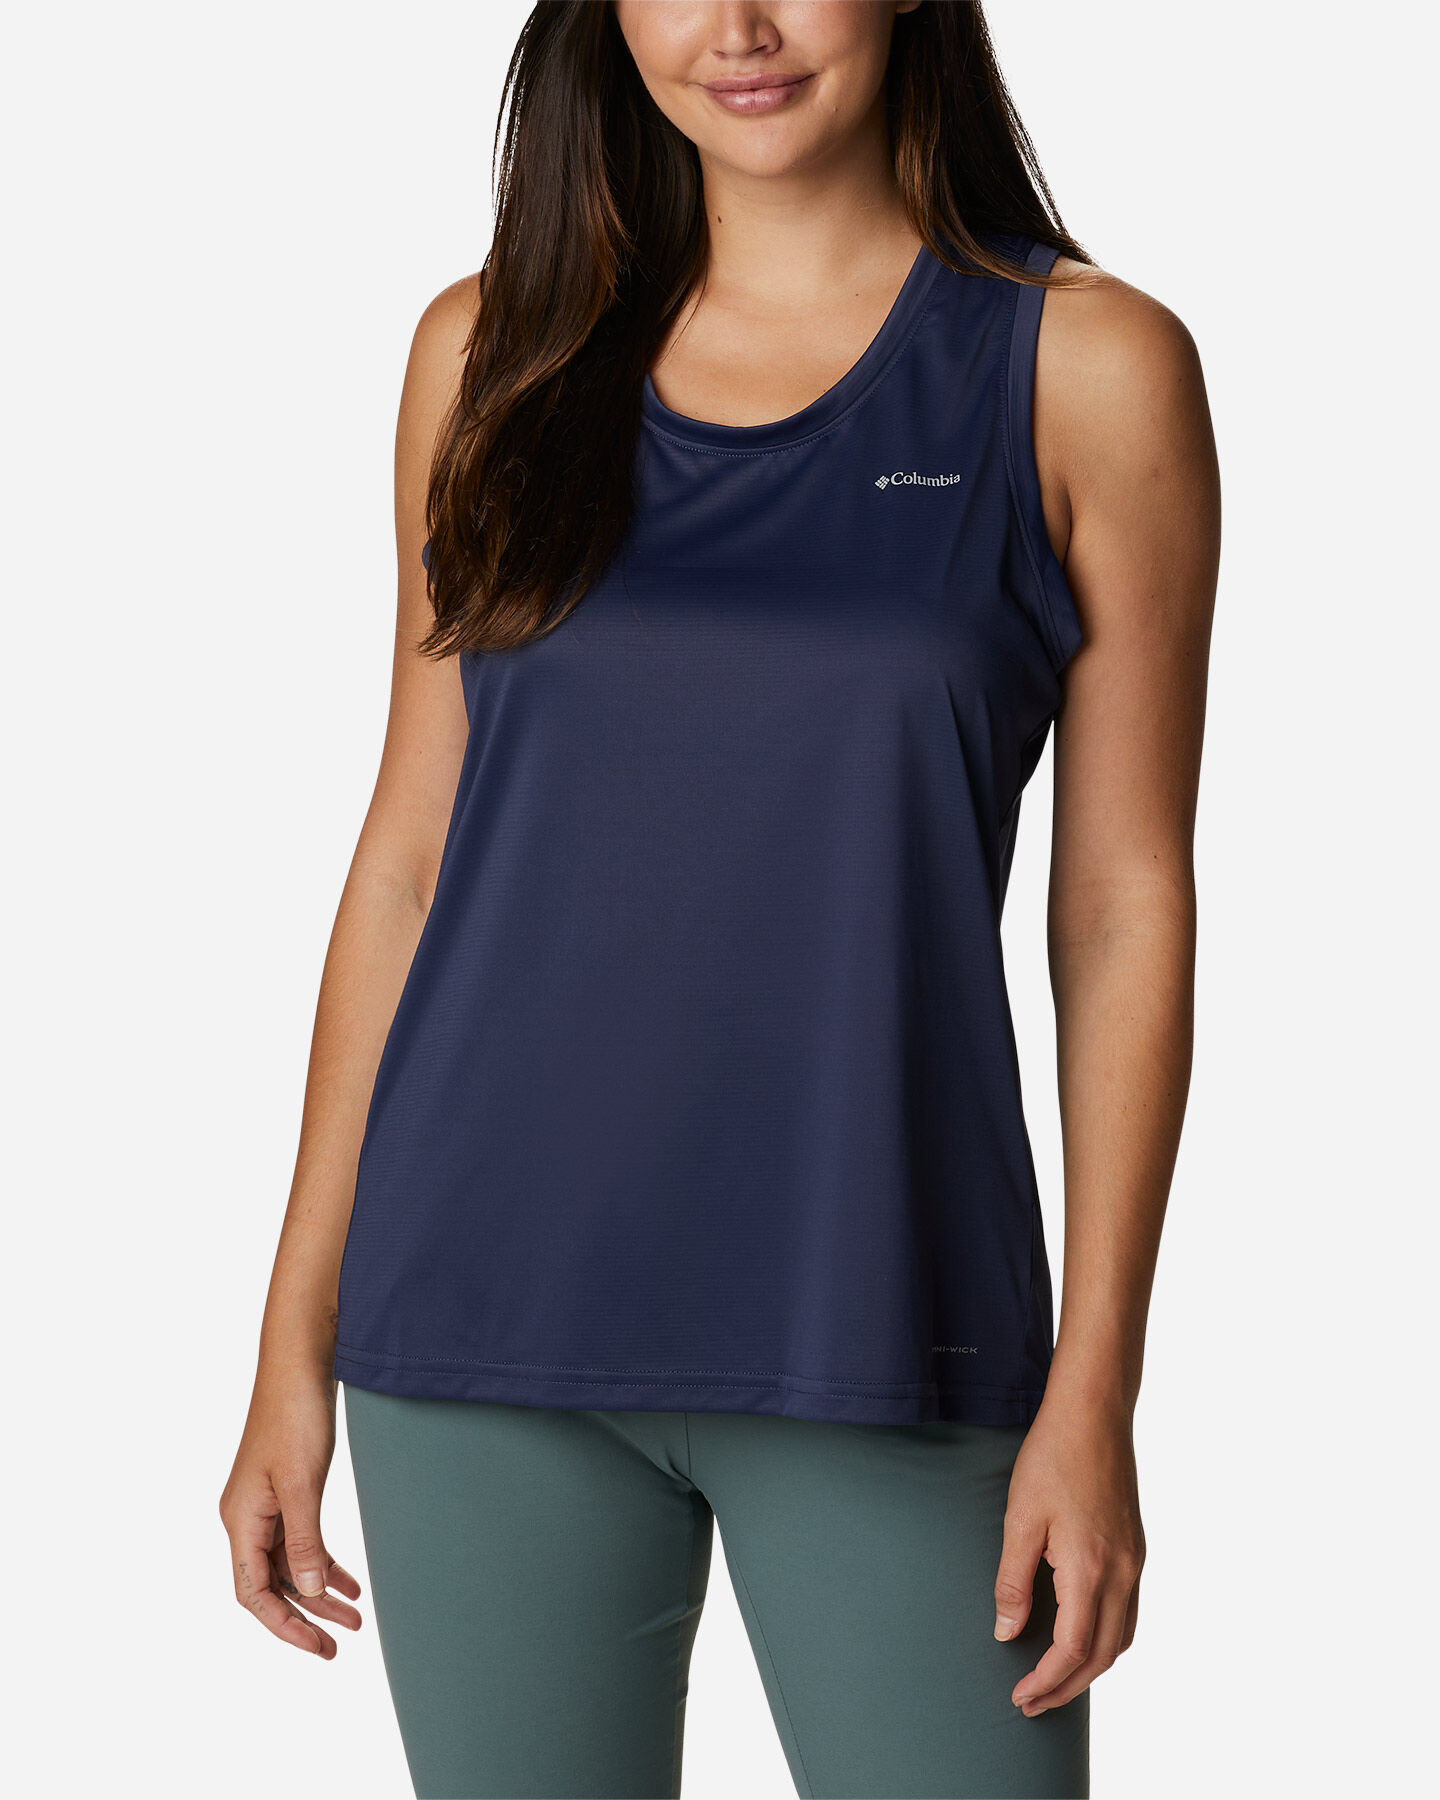  T-Shirt COLUMBIA HIKE W S5407408|466|XS scatto 0